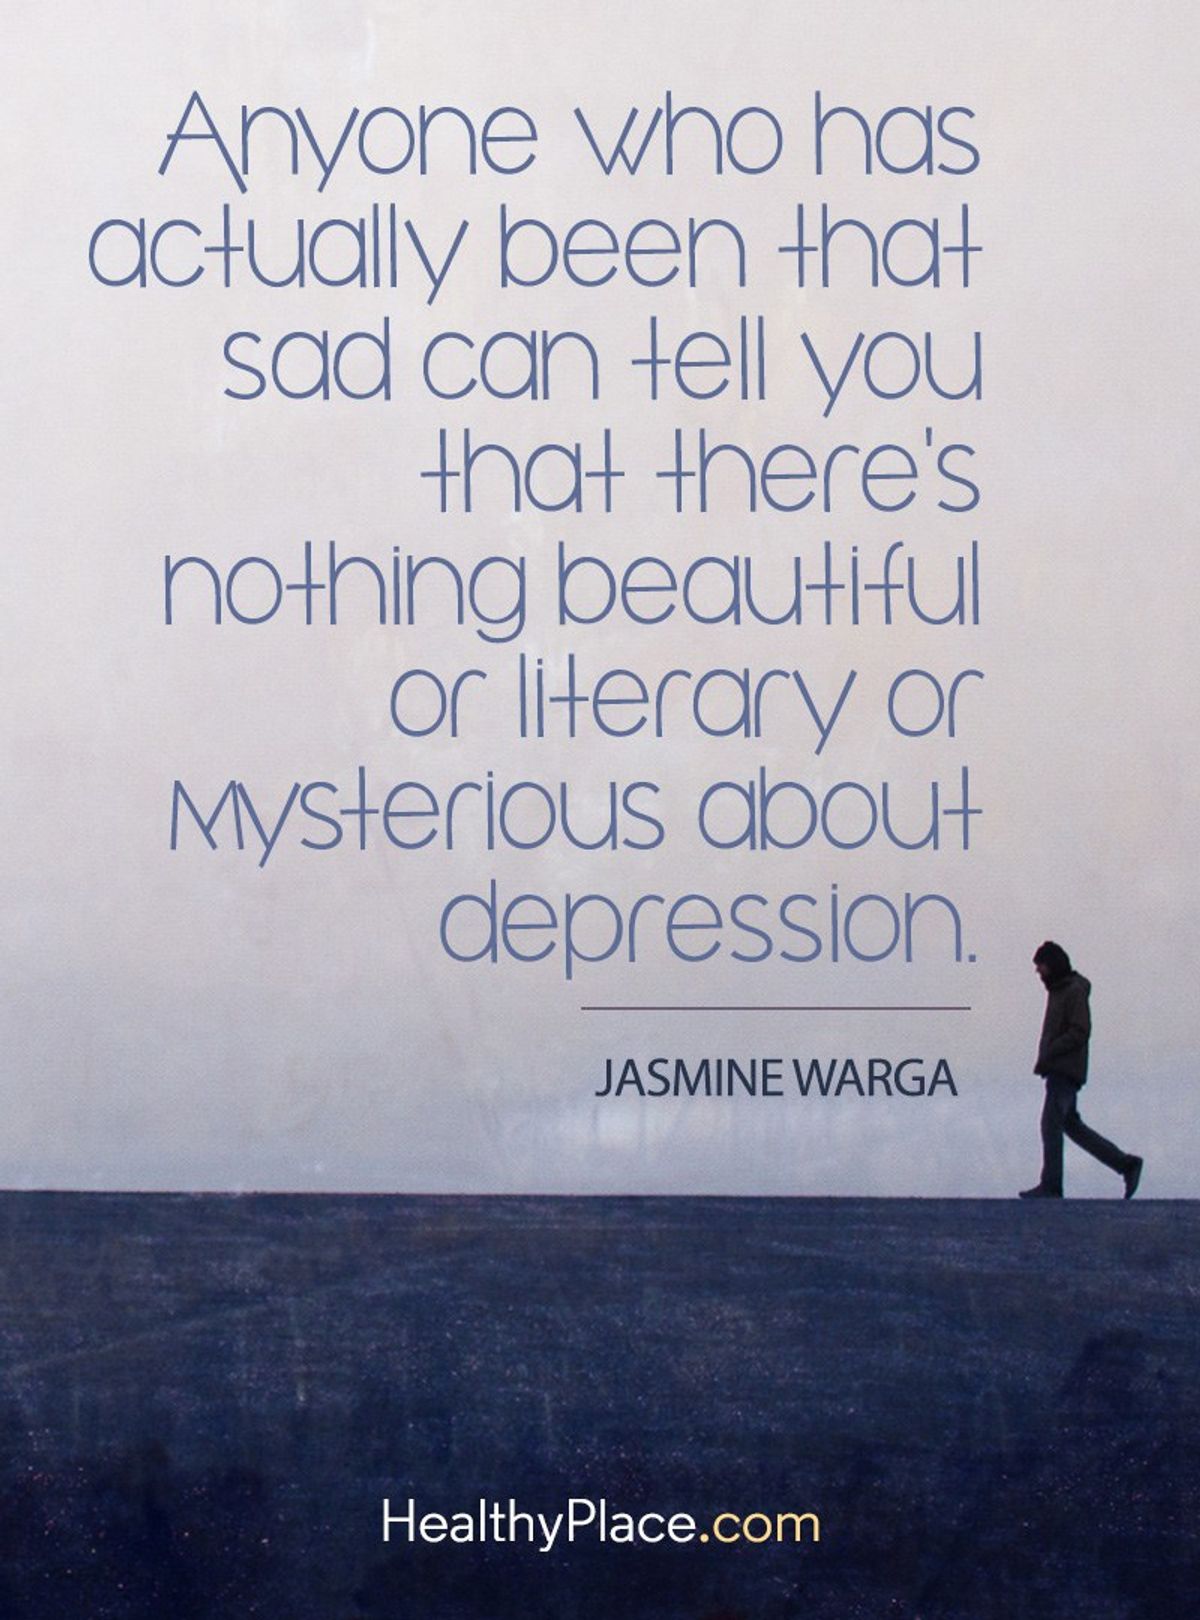 Depression makes you feel numb, Anxiety makes you feel scared